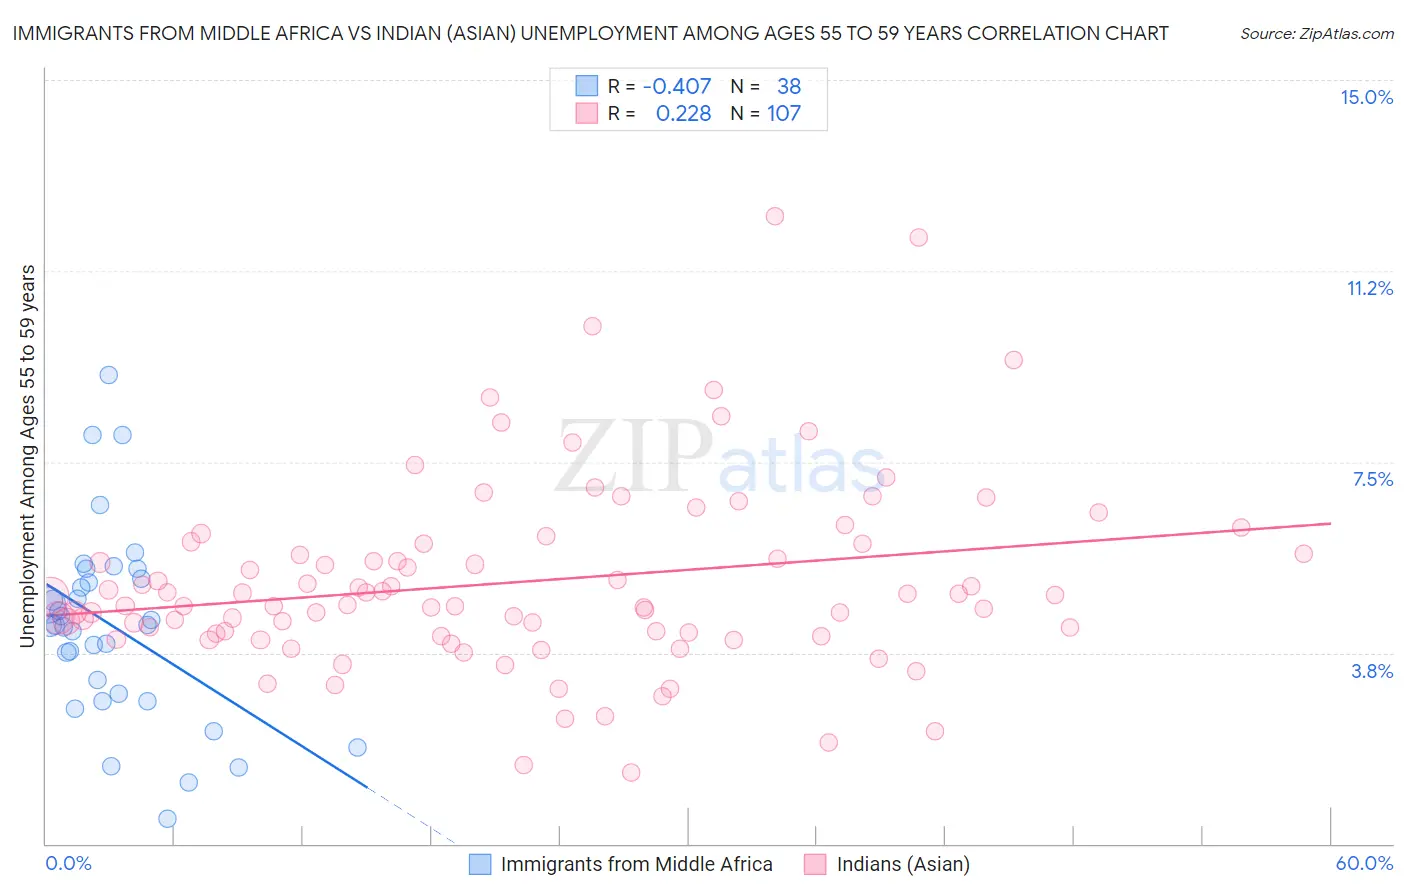 Immigrants from Middle Africa vs Indian (Asian) Unemployment Among Ages 55 to 59 years